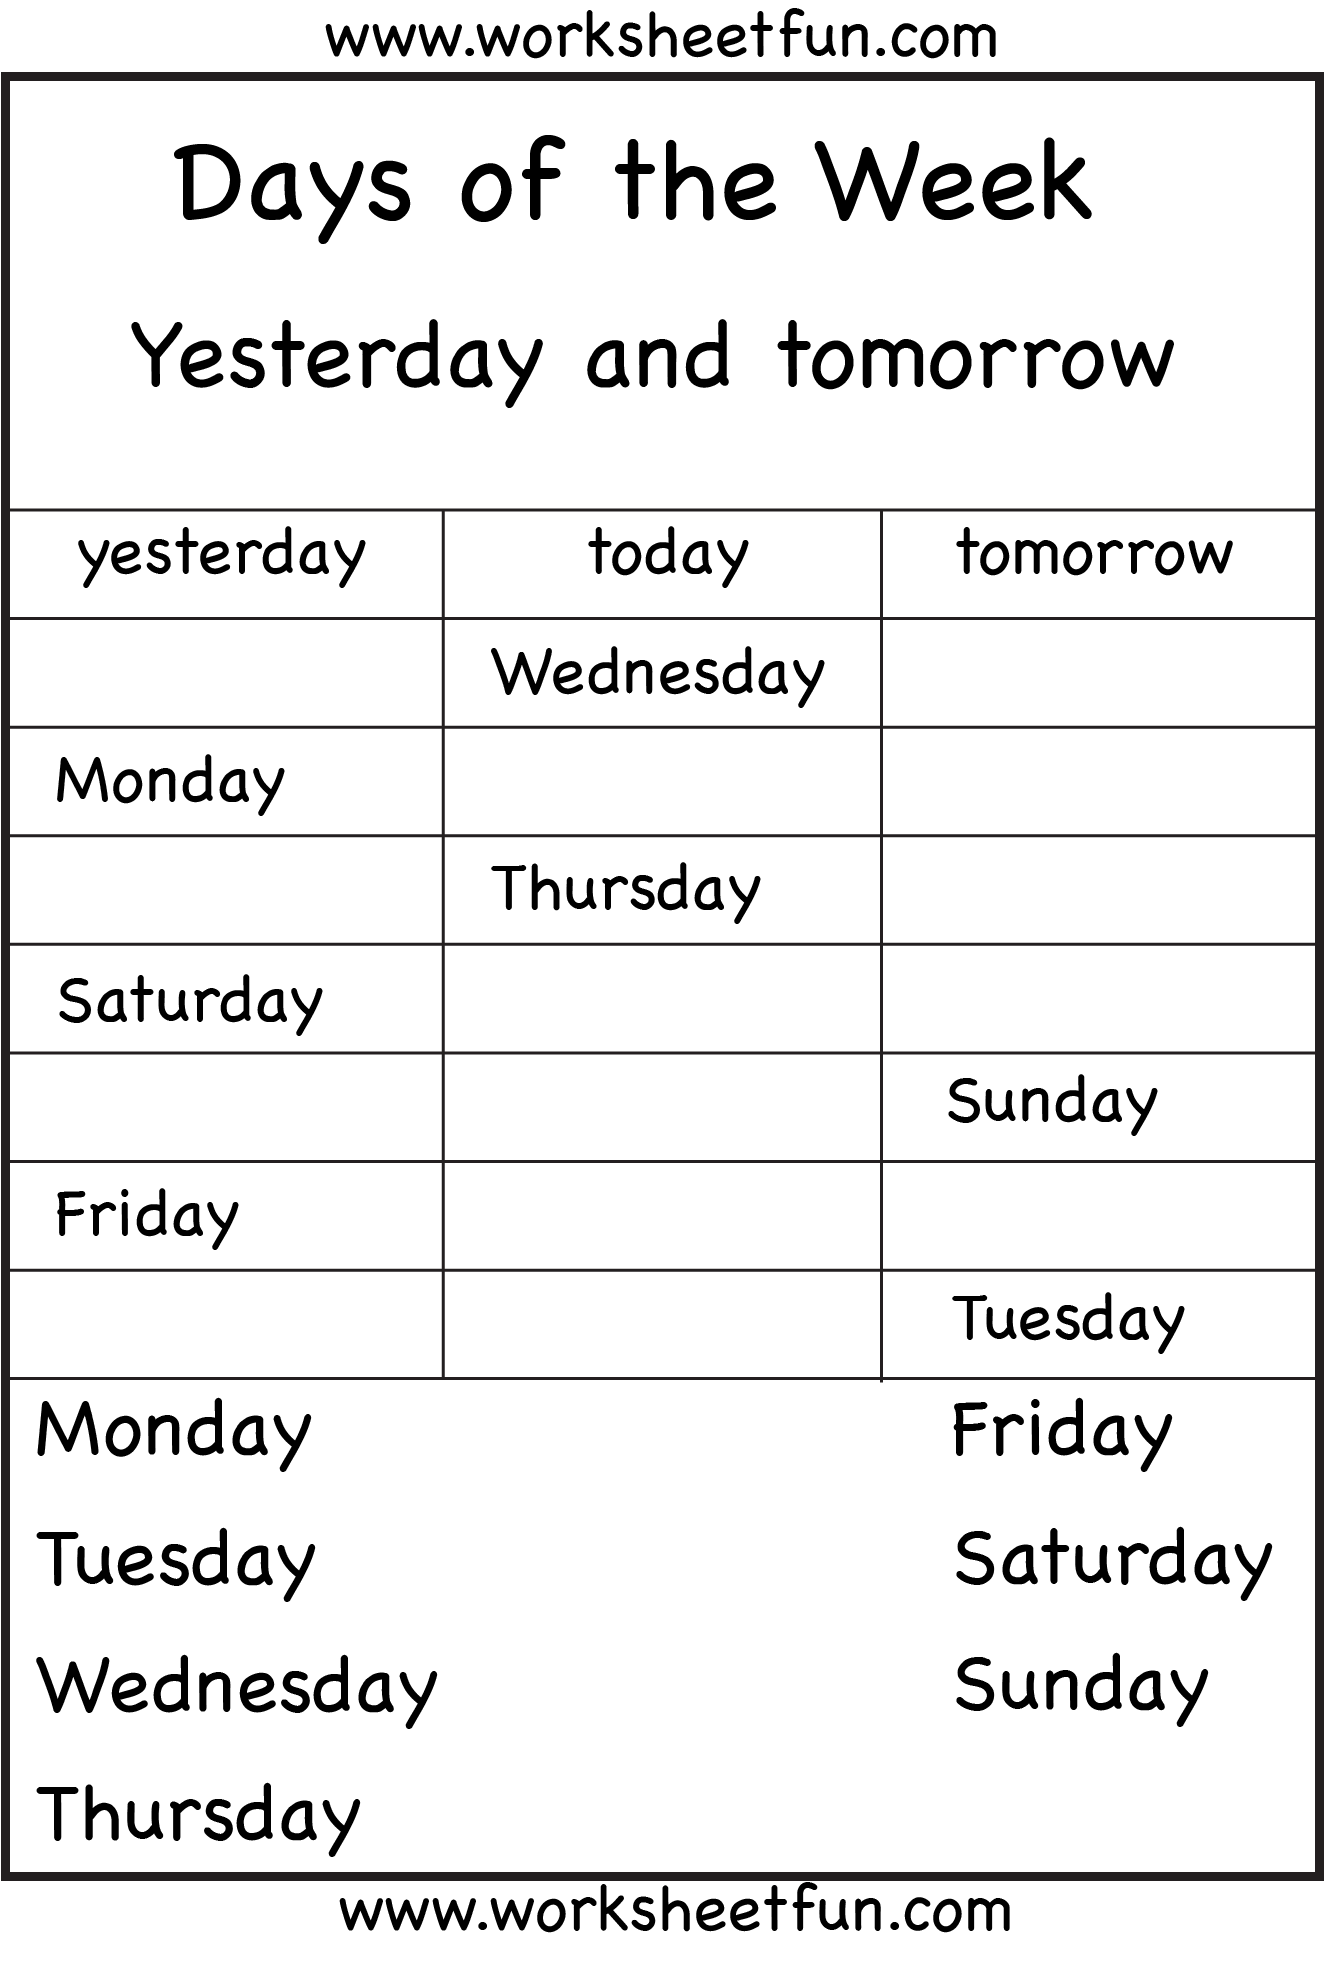 Days Of The Week Yesterday And Tomorrow 6 Worksheets FREE